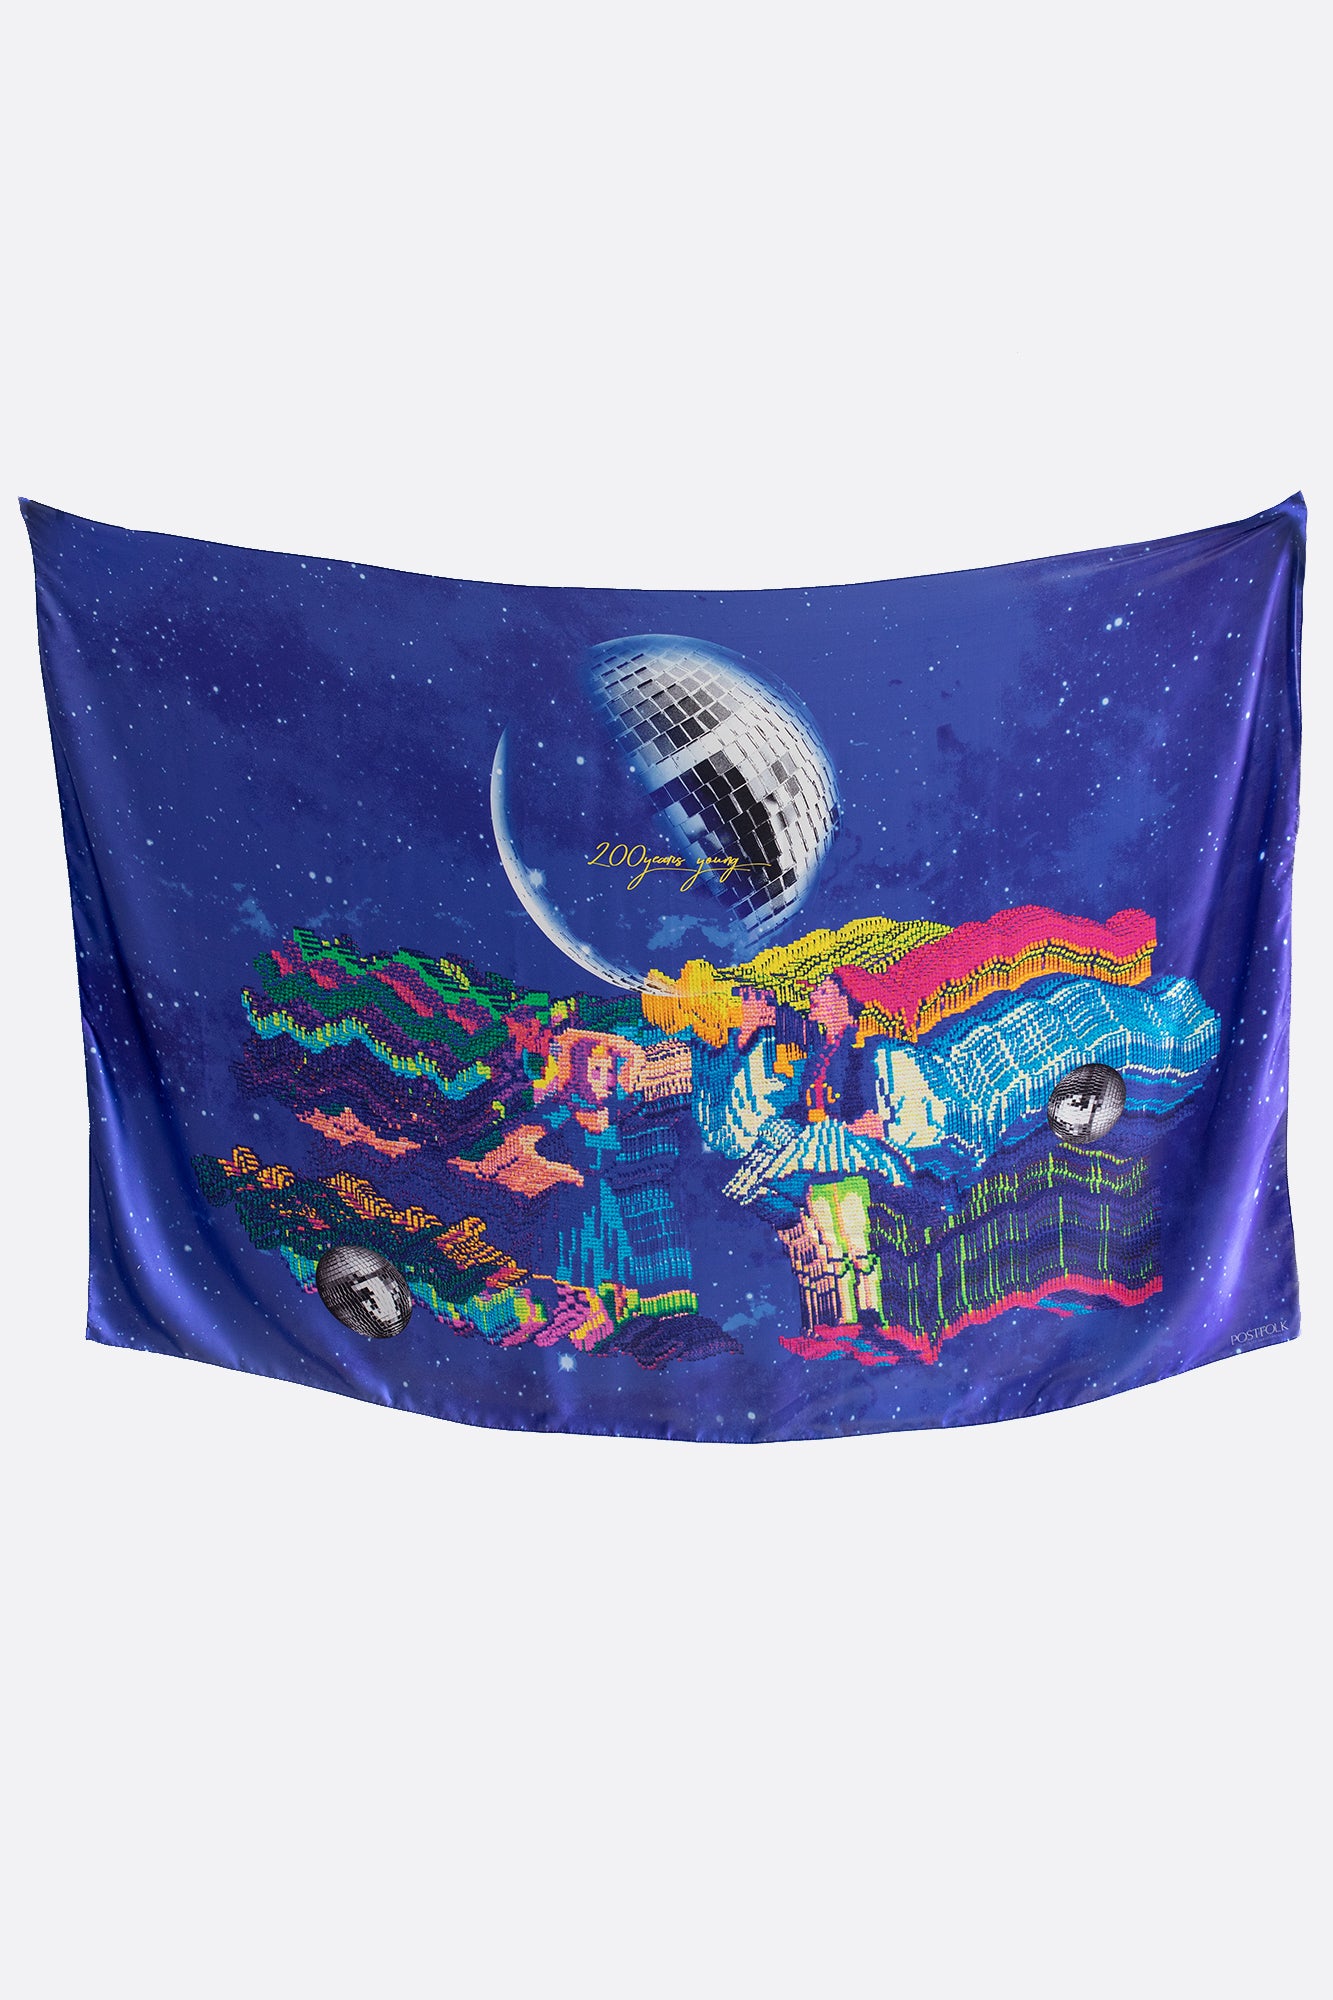 G&T on Planet Neptune - Silk Scarf